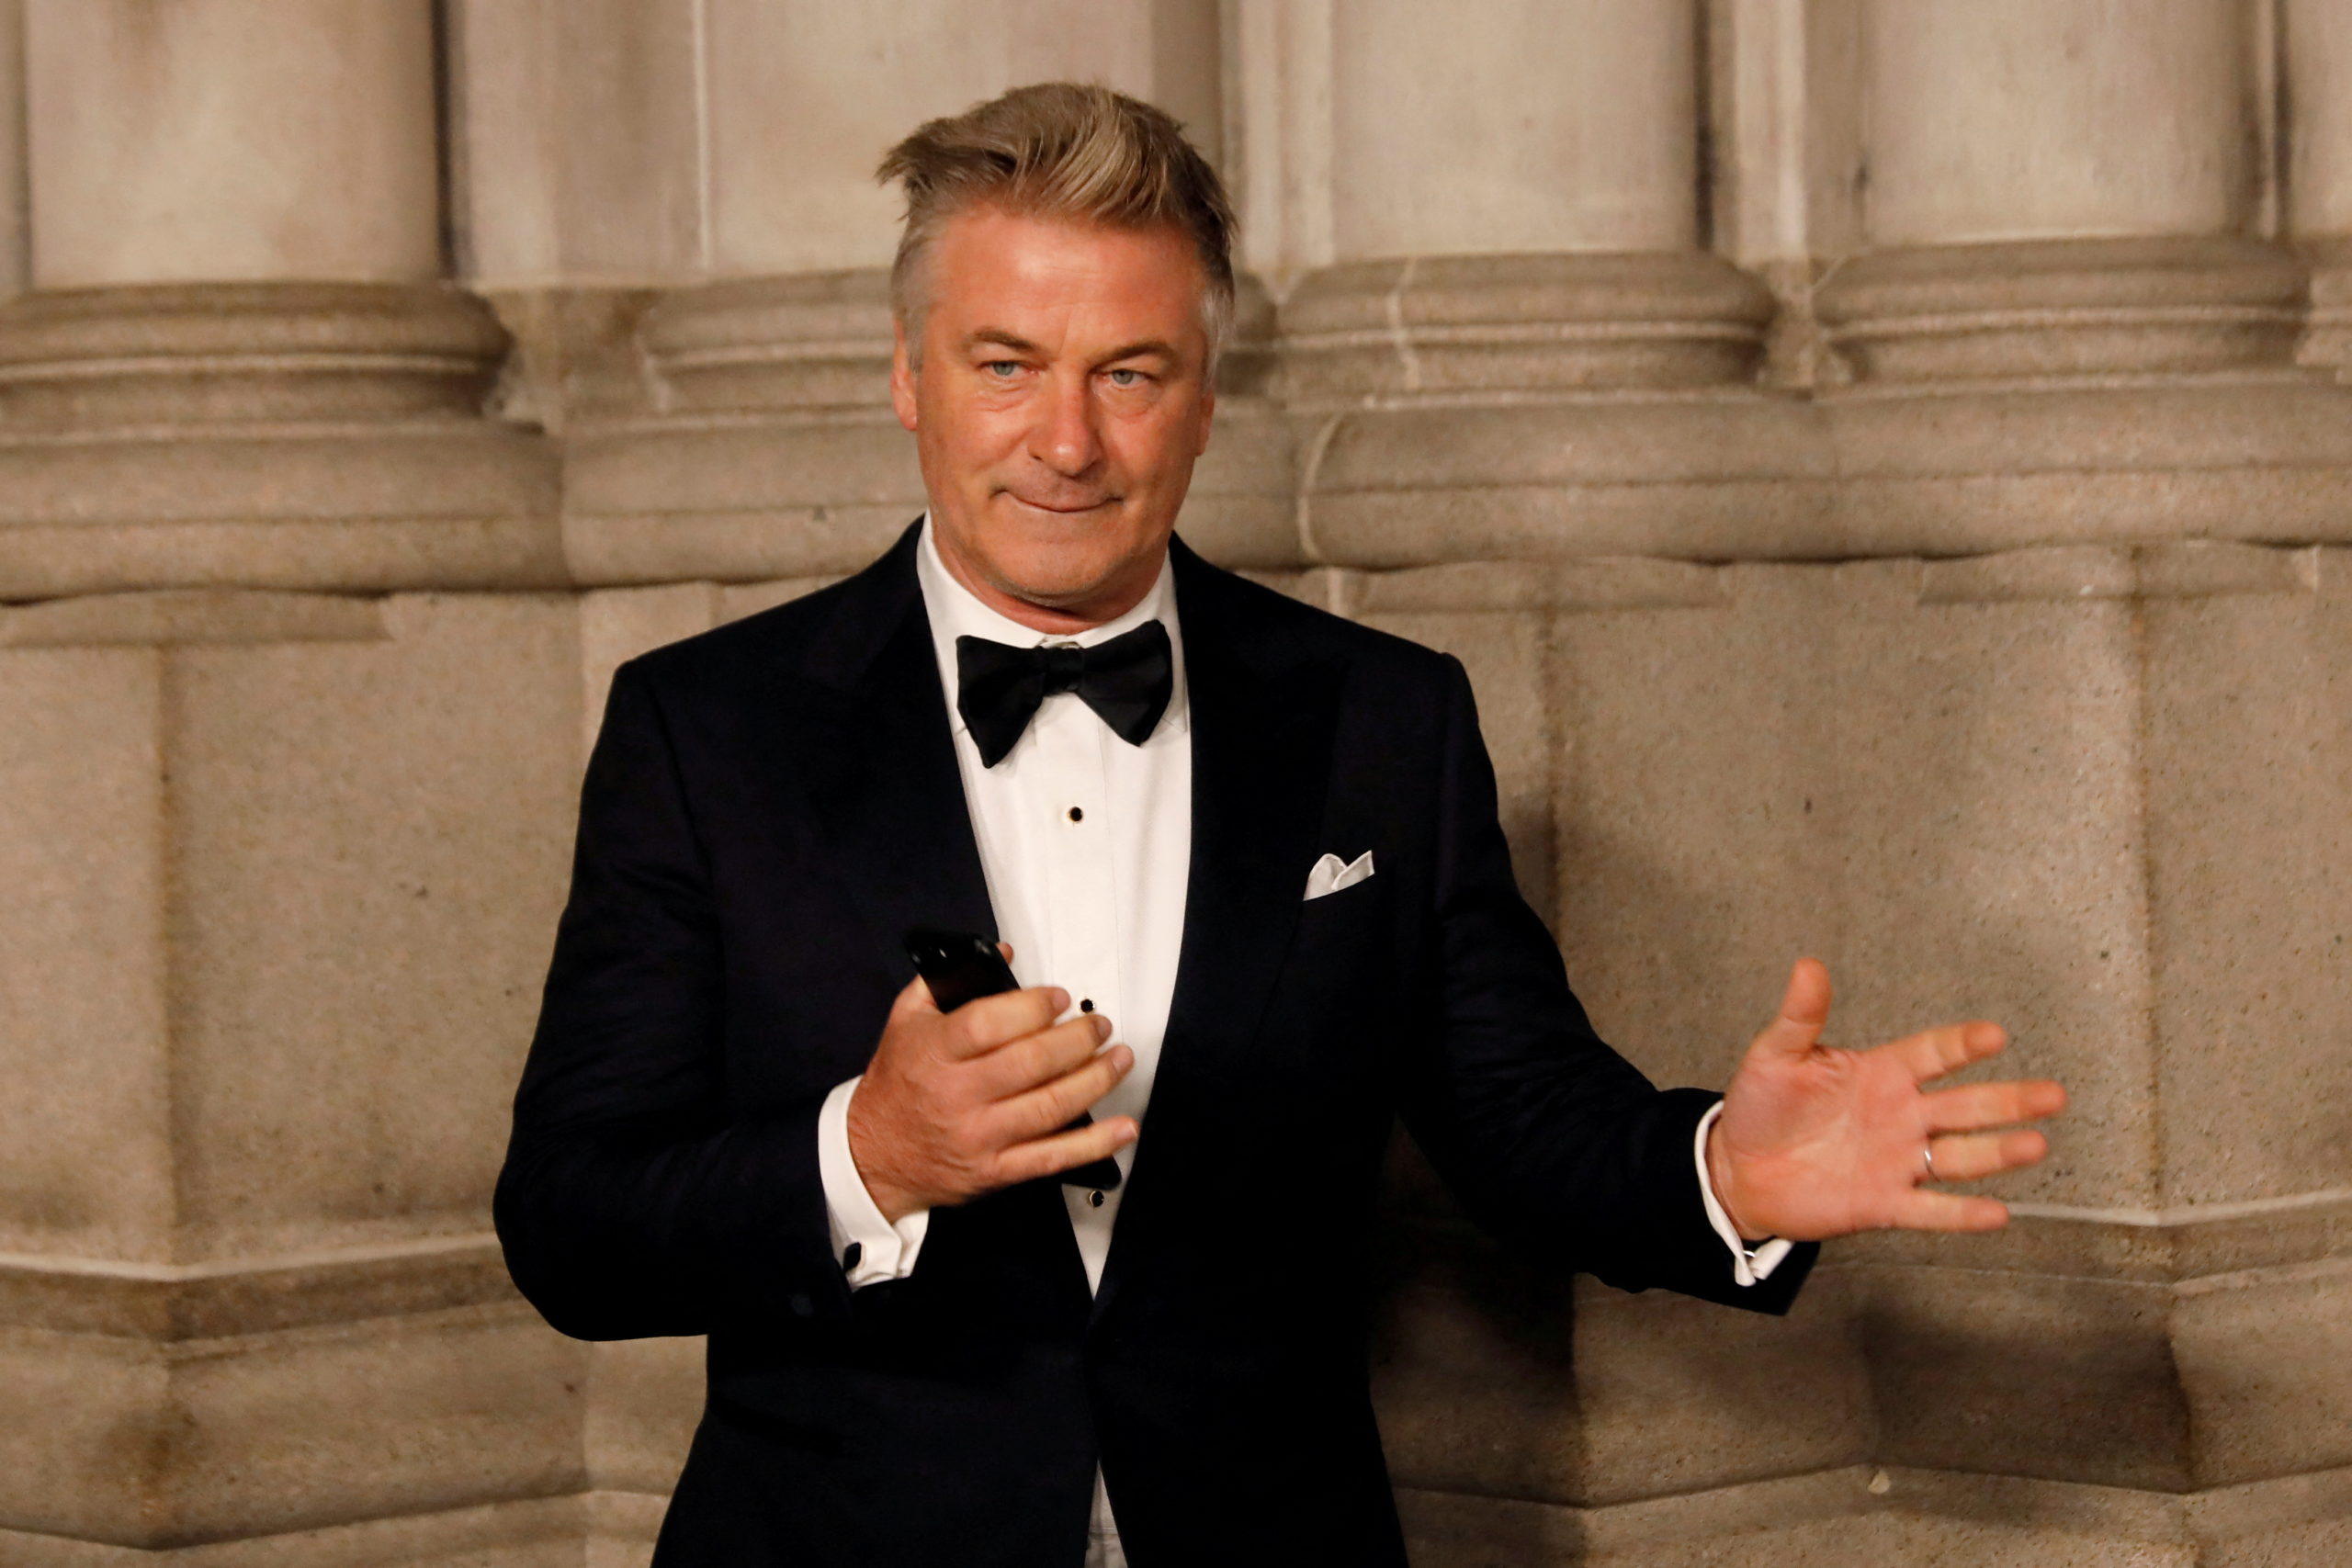 Alec Baldwin says his contract protects him from liability in 'Rust' shooting